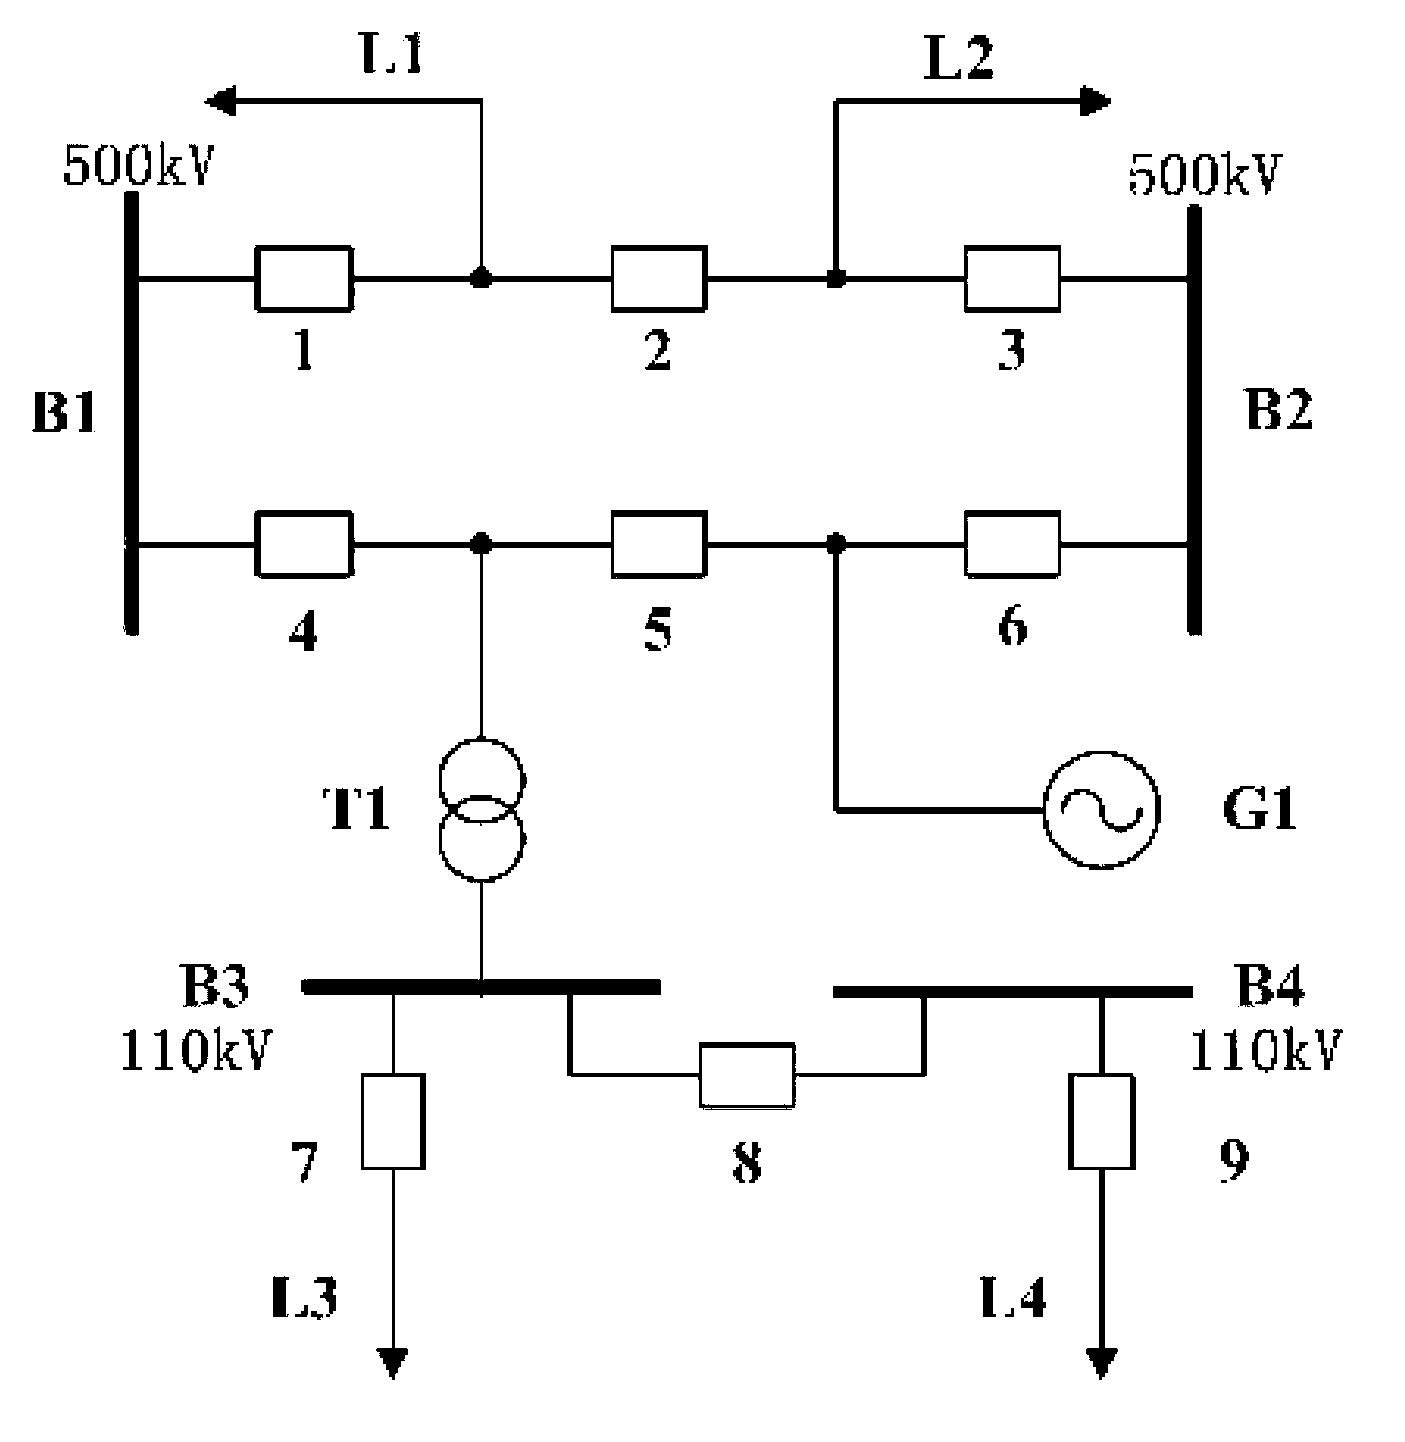 Intelligent substation fault diagnosis method combining topology and relay protection logic